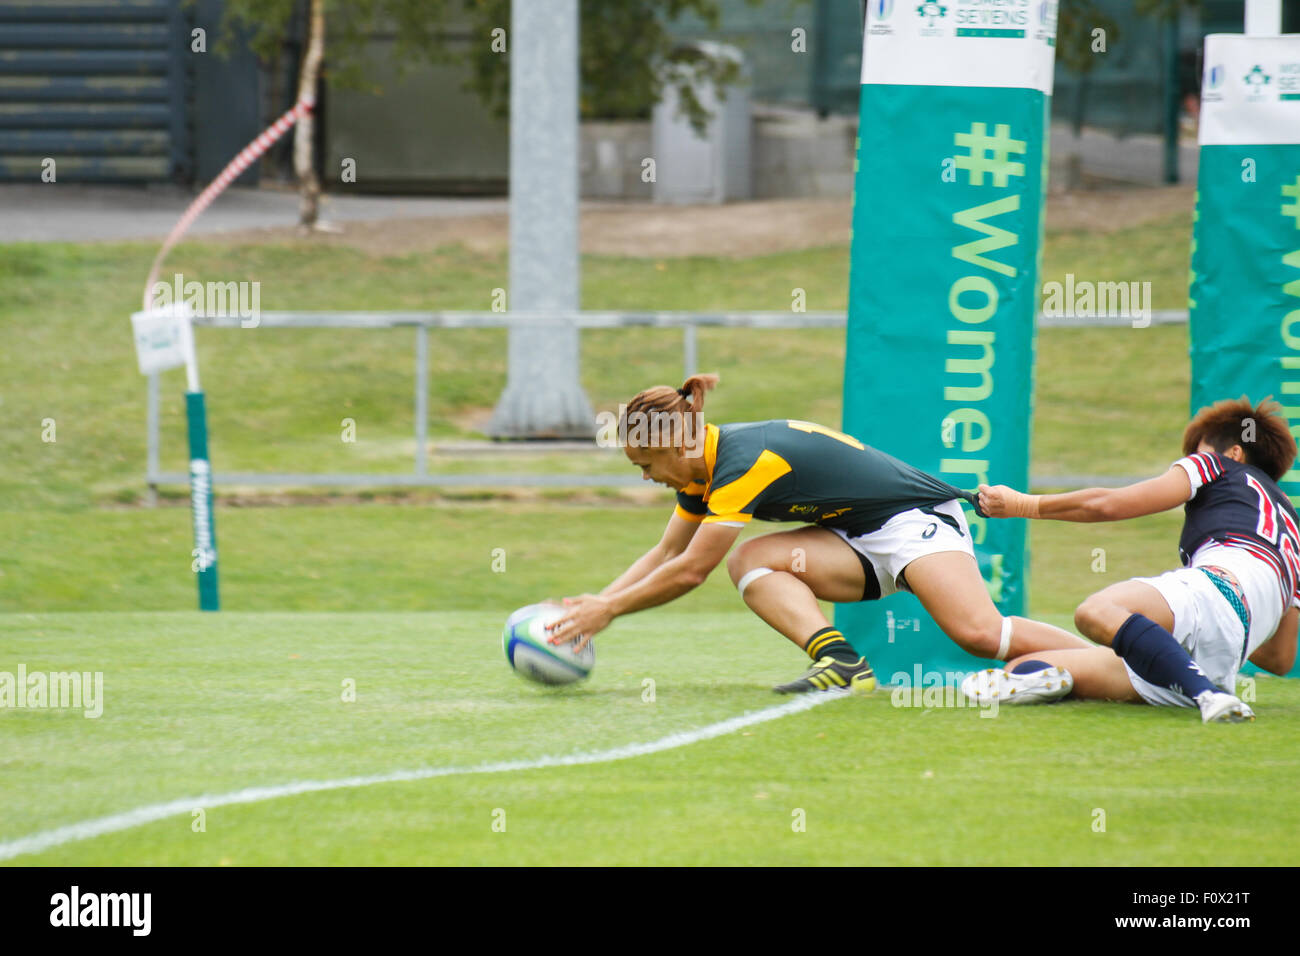 Dublin, Ireland. 22nd August 2015. South Africa v Hong Kong during the Women's Sevens Series Qualifier matches at the UCD Bowl, Dublin. South Africa won 31 - 5. Credit: Elsie Kibue / Alamy Live News Stock Photo